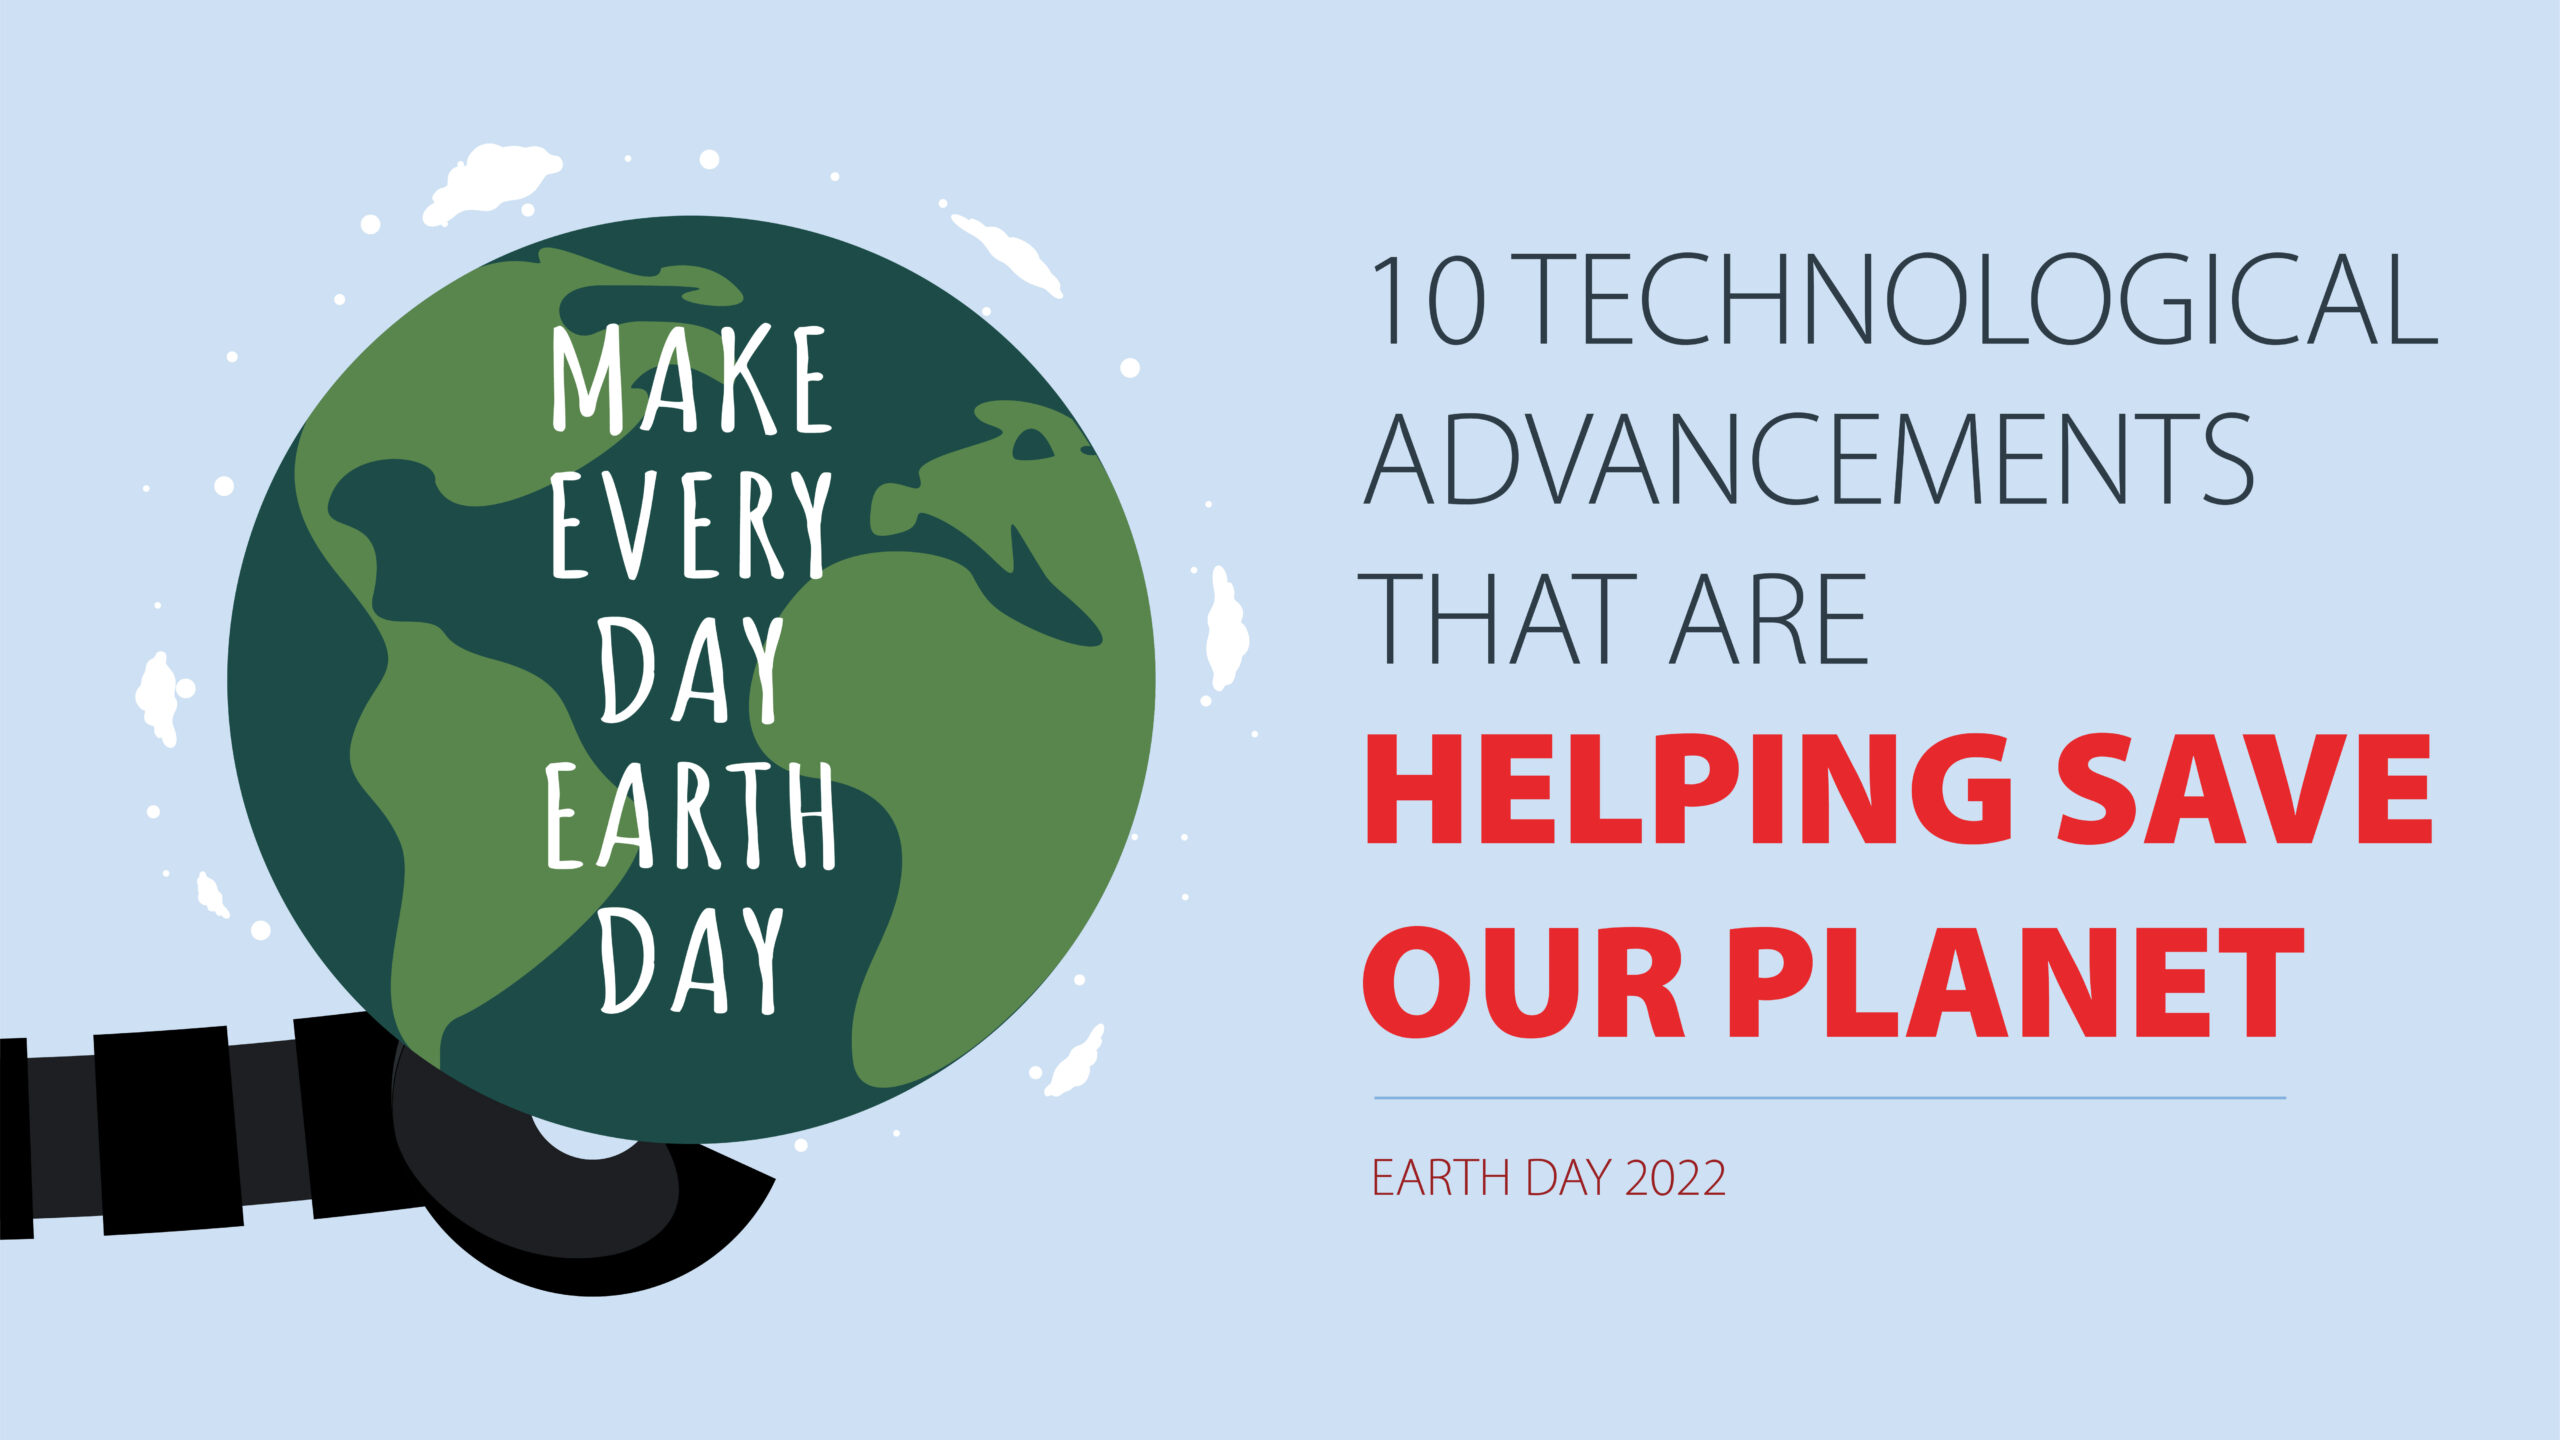 10 Technological Advancements that are Helping Save Our Planet